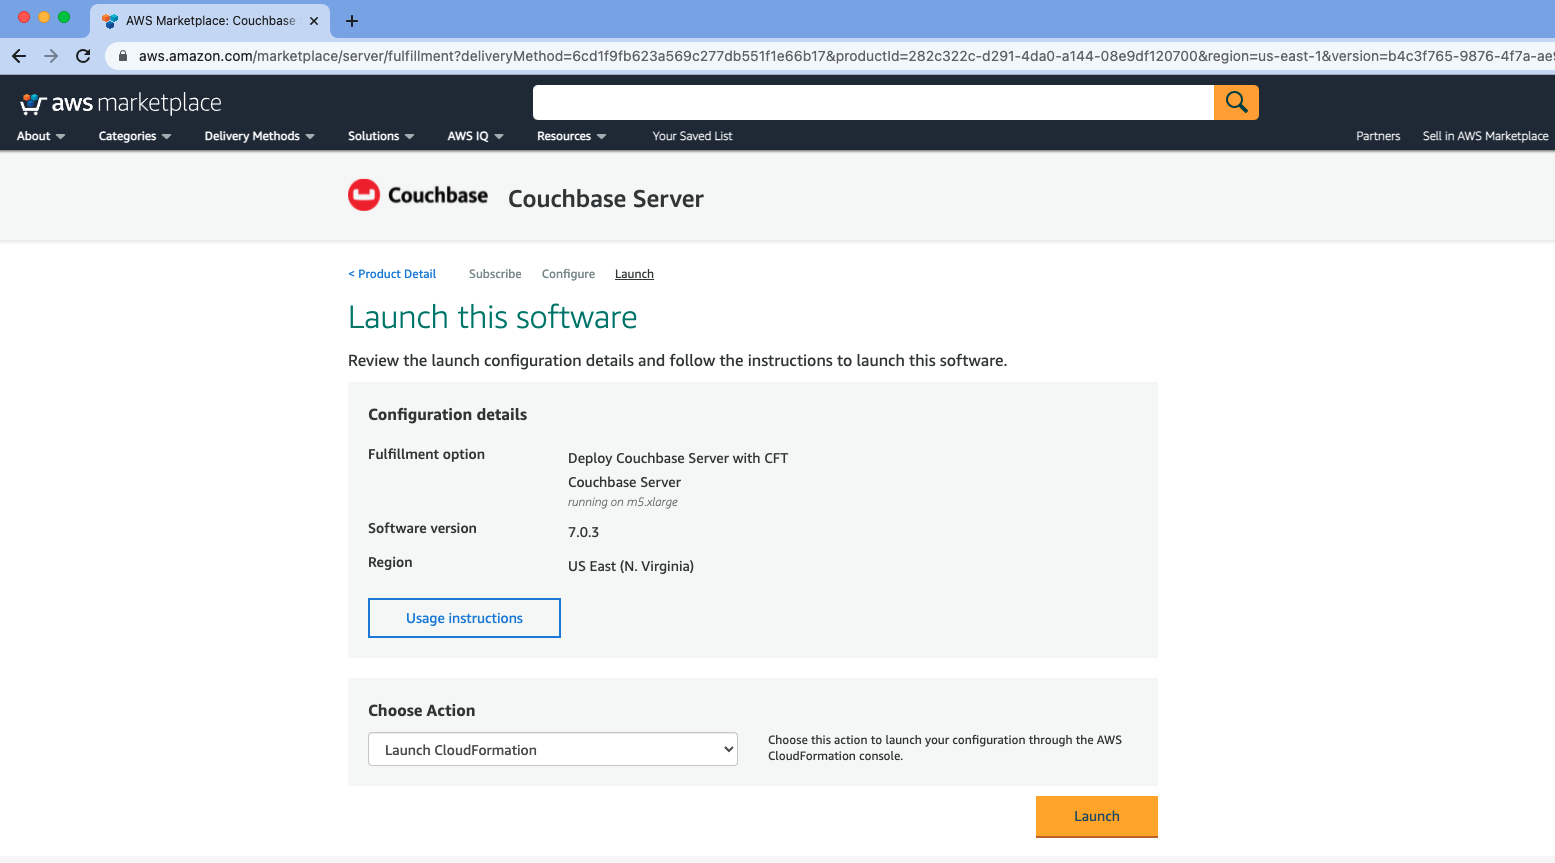 aws marketplace couchbase ee launch action